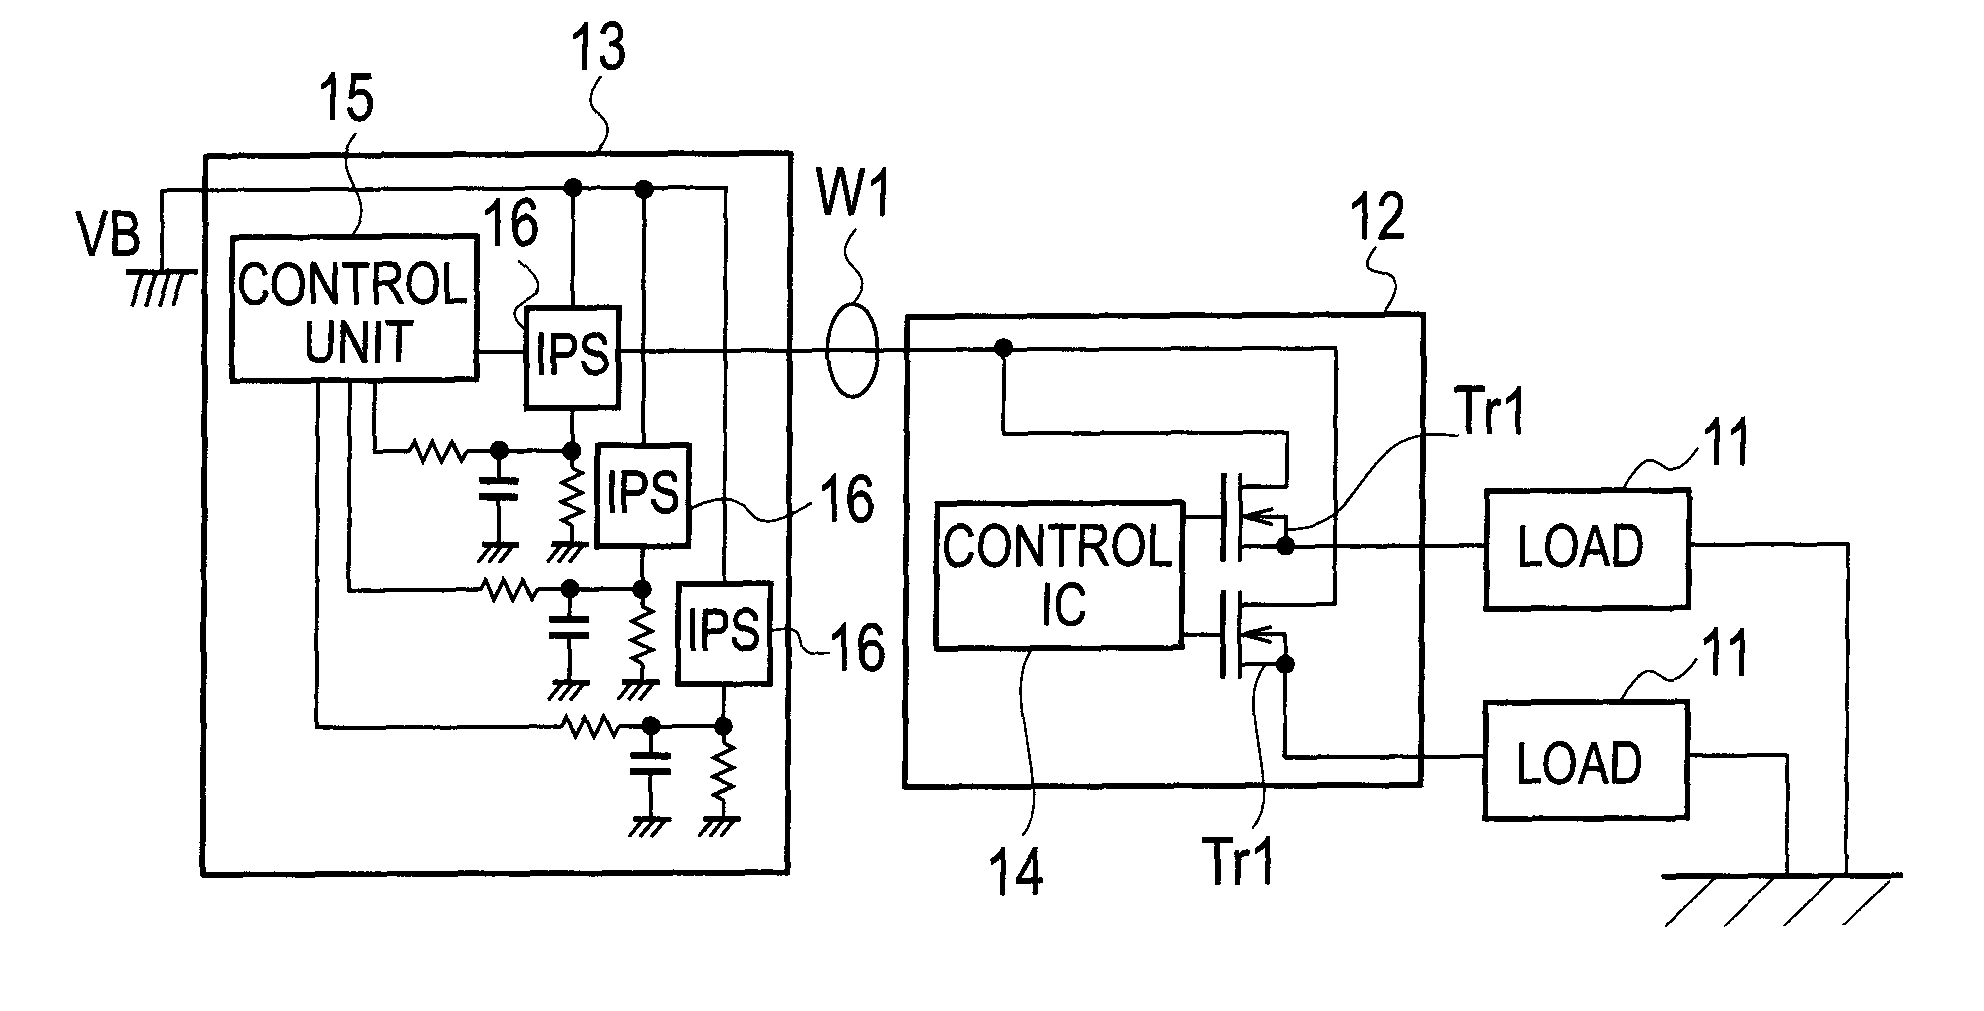 Protection apparatus of load circuit